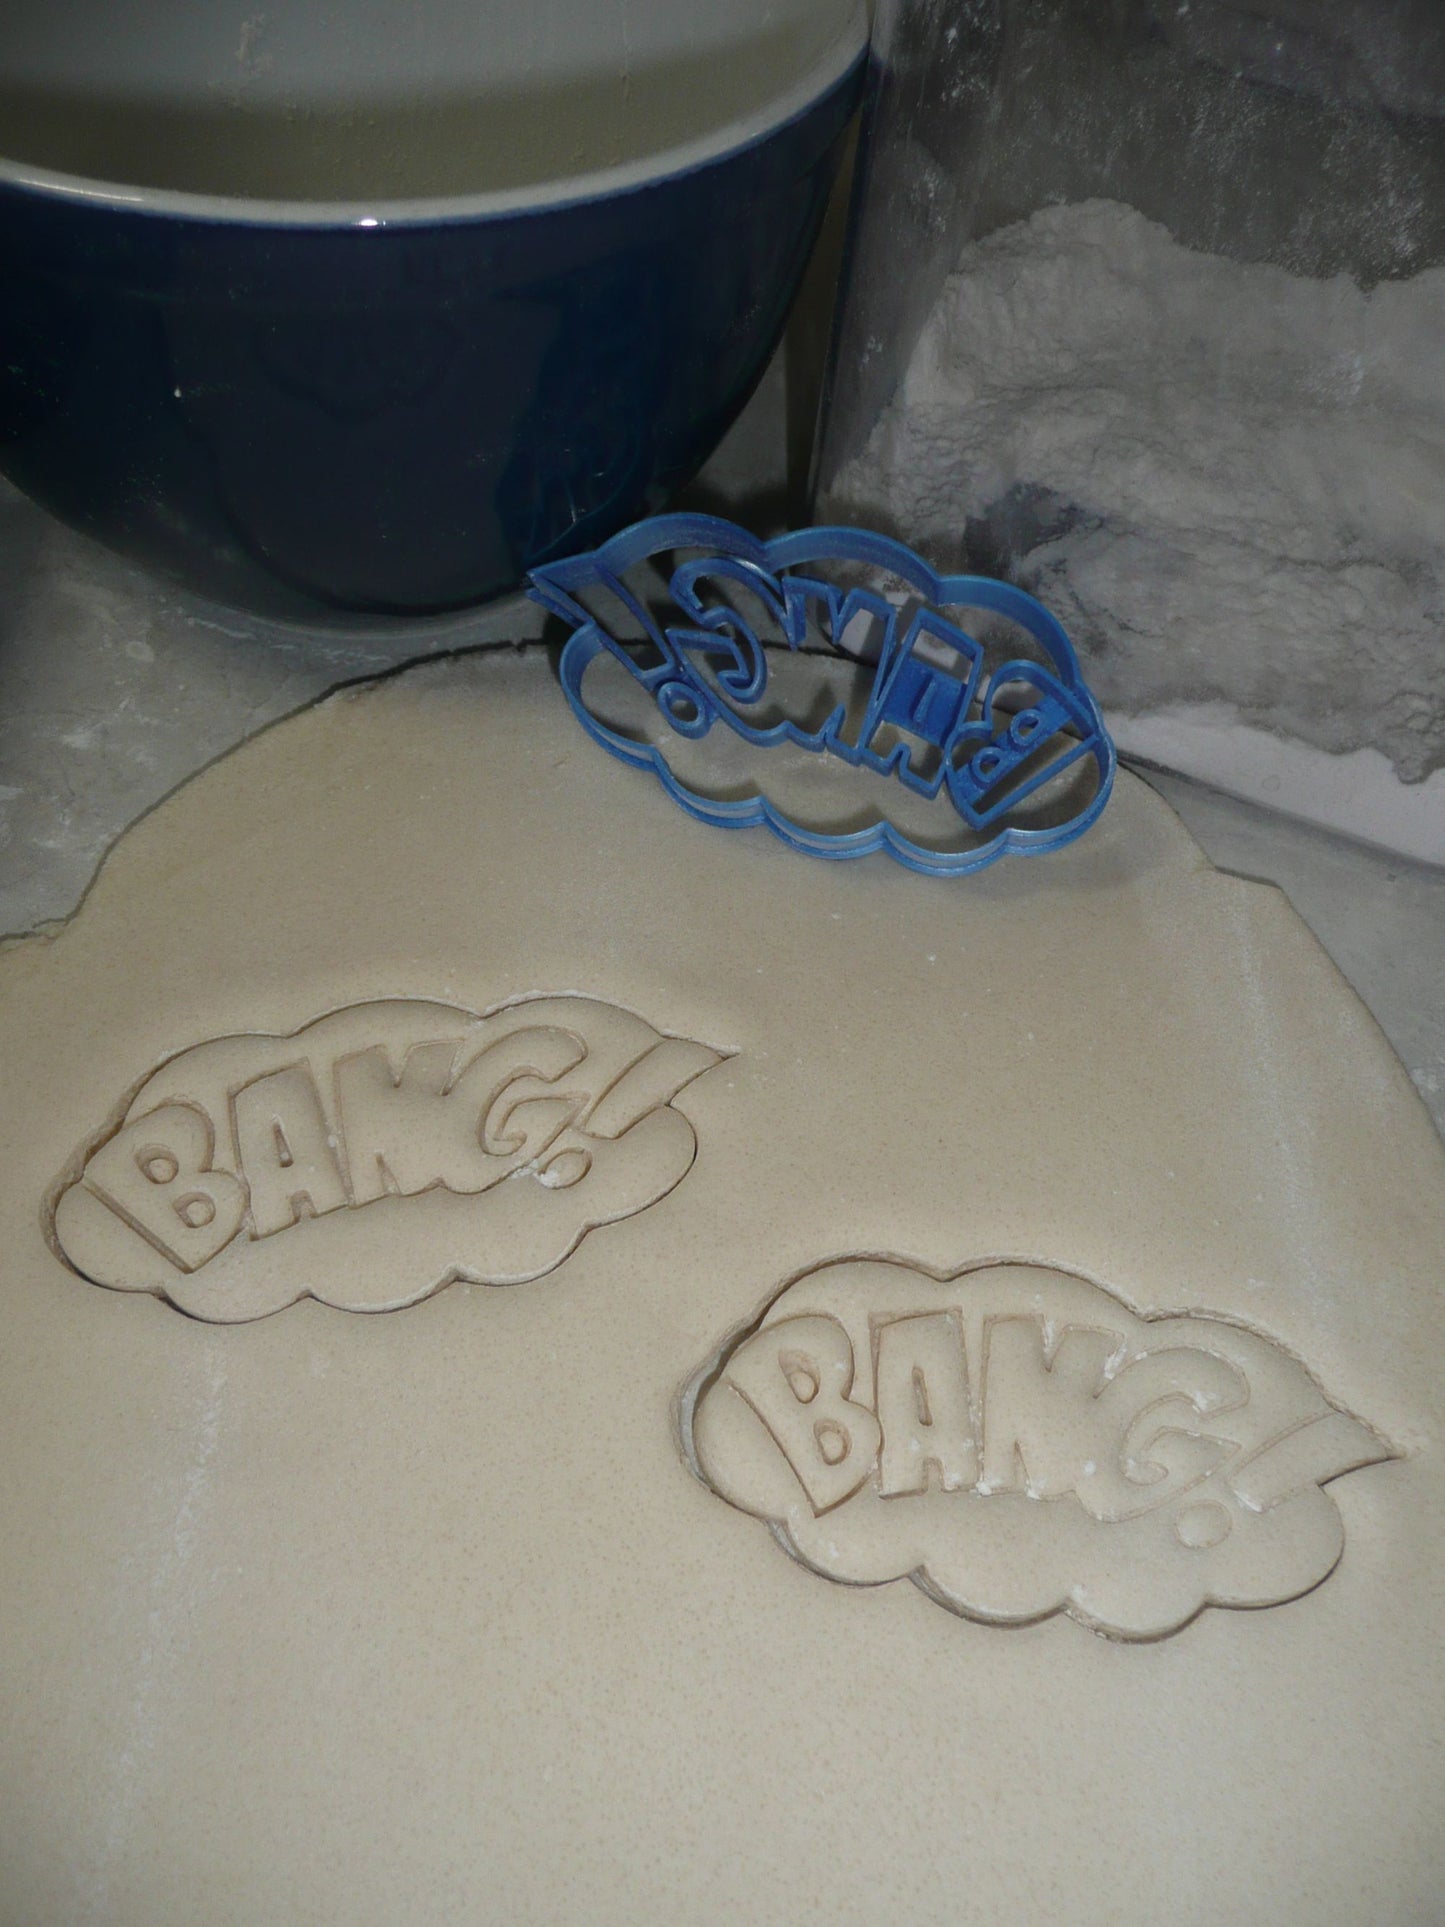 Bang Sign Quote Superhero Comic Book Movie Cookie Cutter Made in USA PR3198